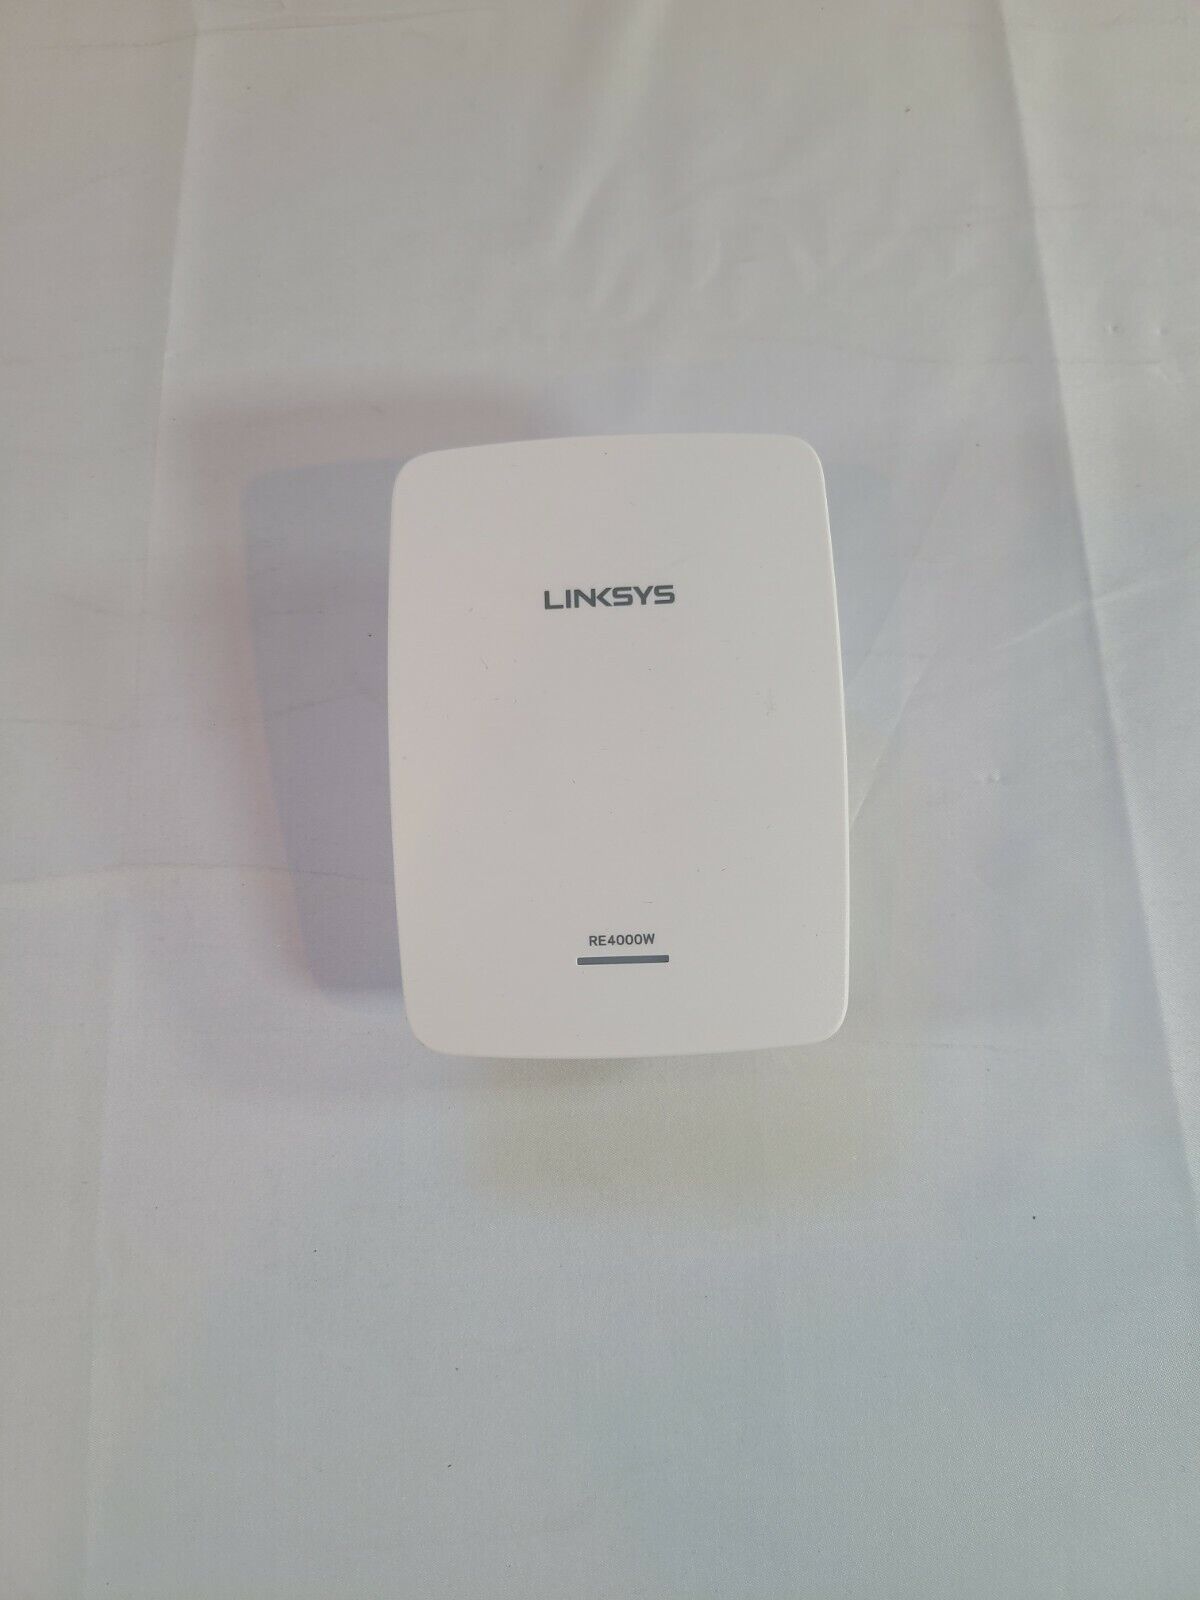 Linksys RE4000W N600 Dual-Band WiFi Extender (No Cords Included)